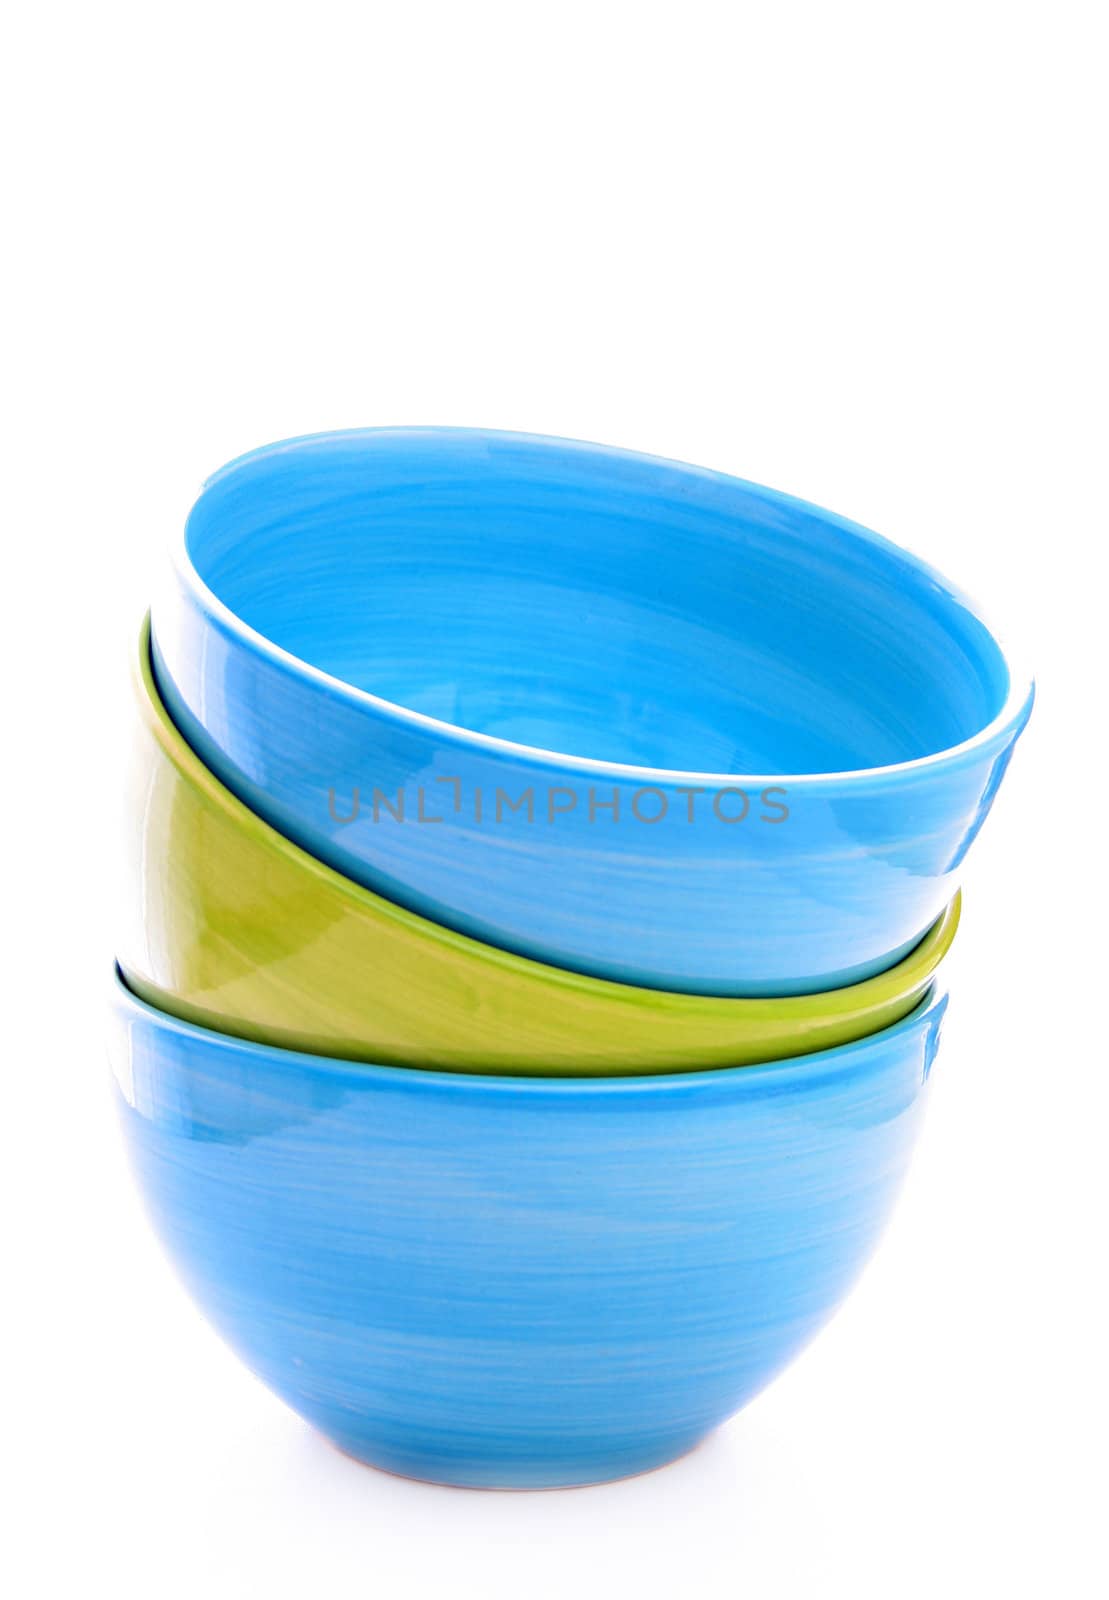 three colorful bowls stacked up and isolated on a white background.
